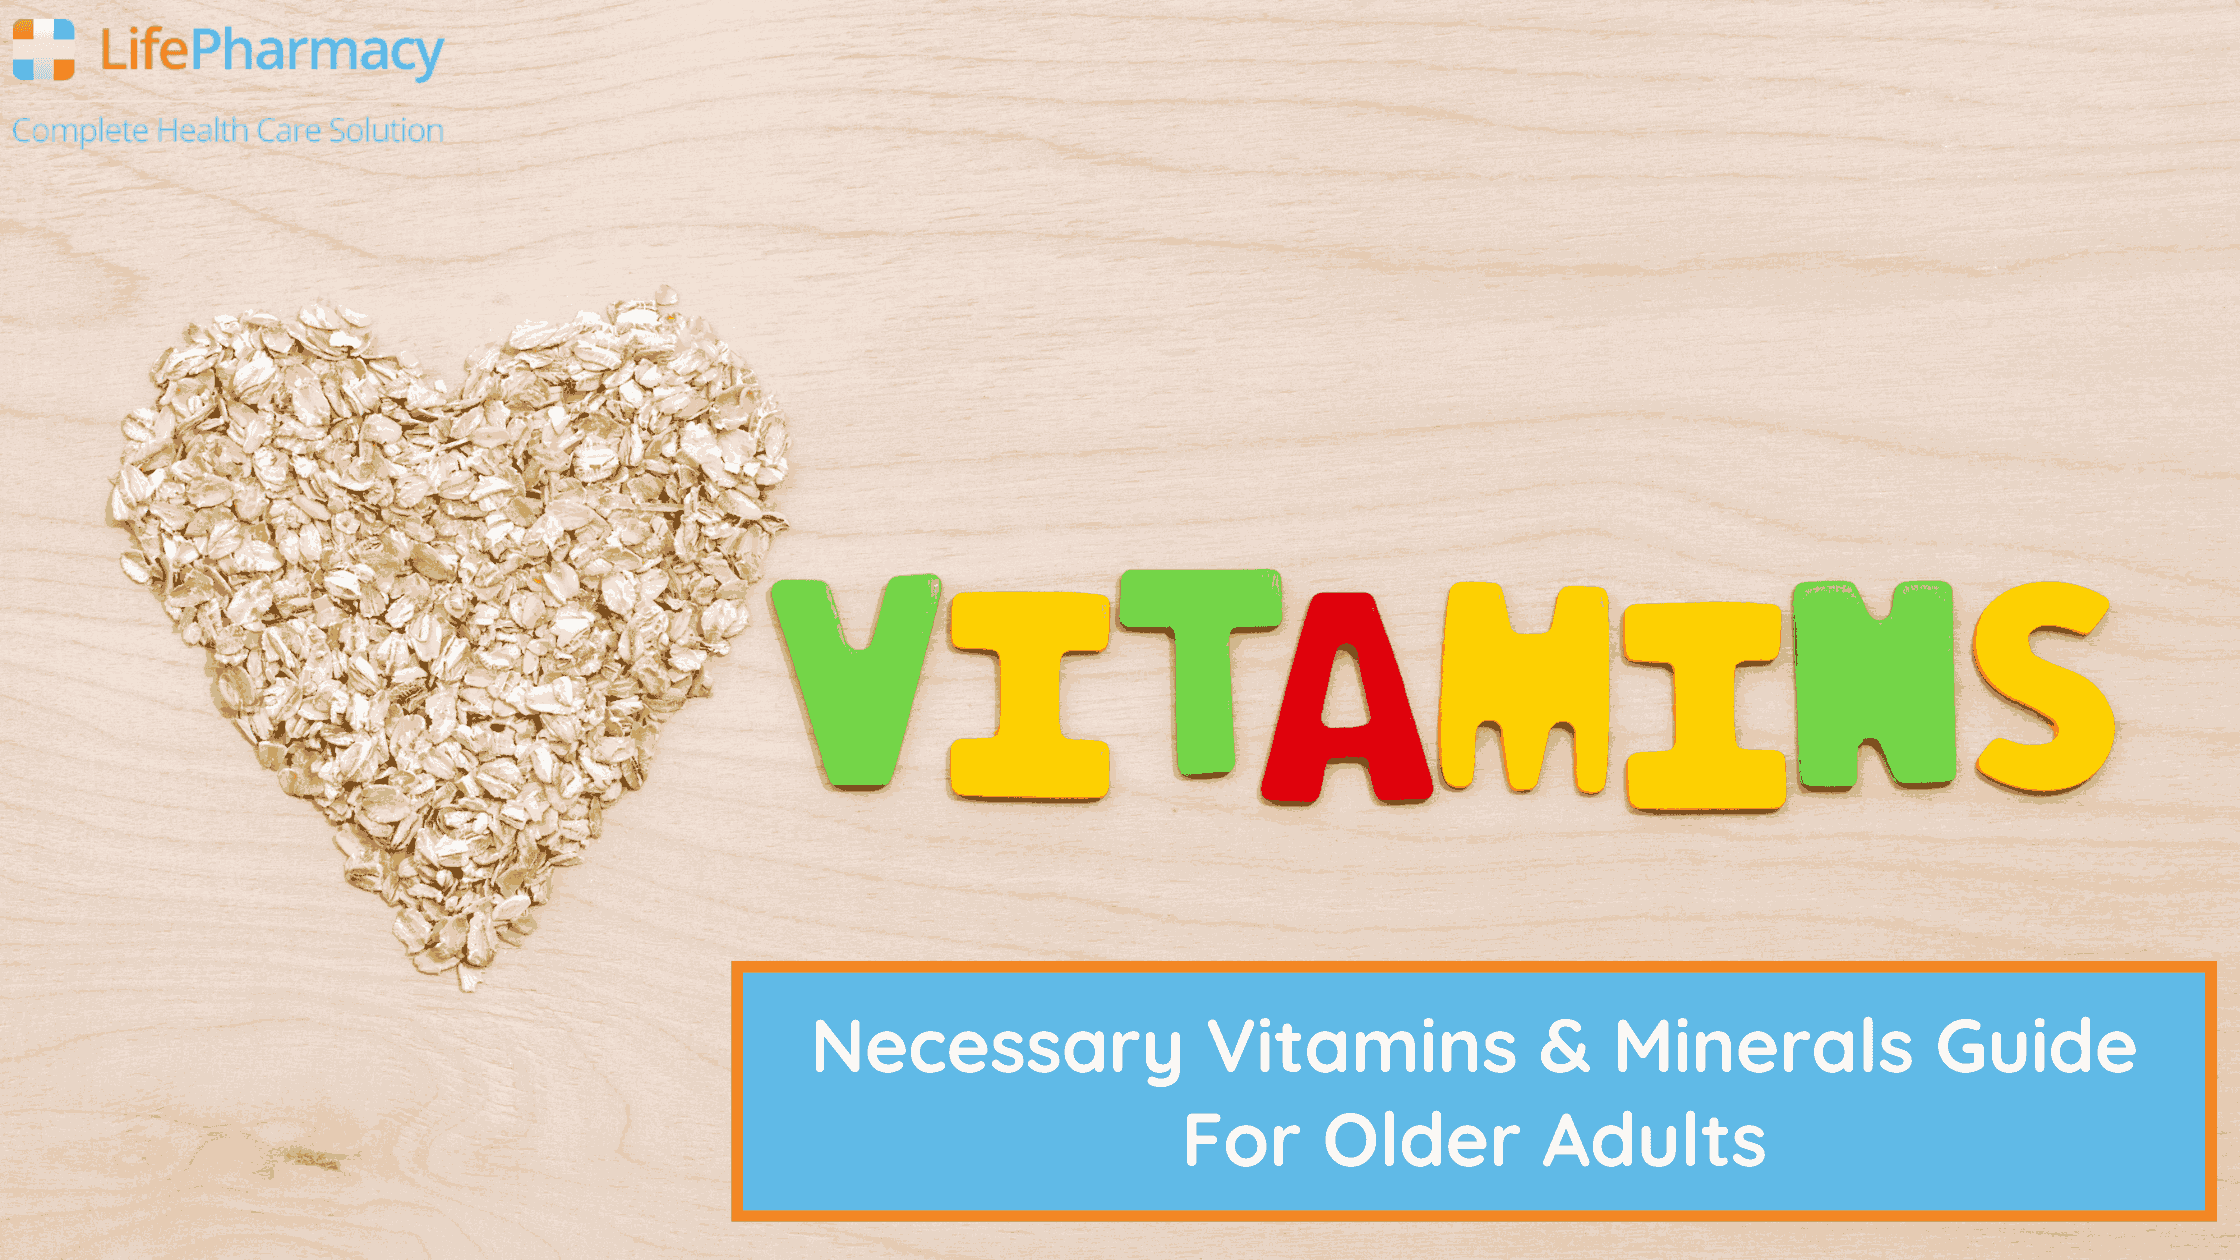 Necessary Vitamins & Minerals Guide For Older Adults